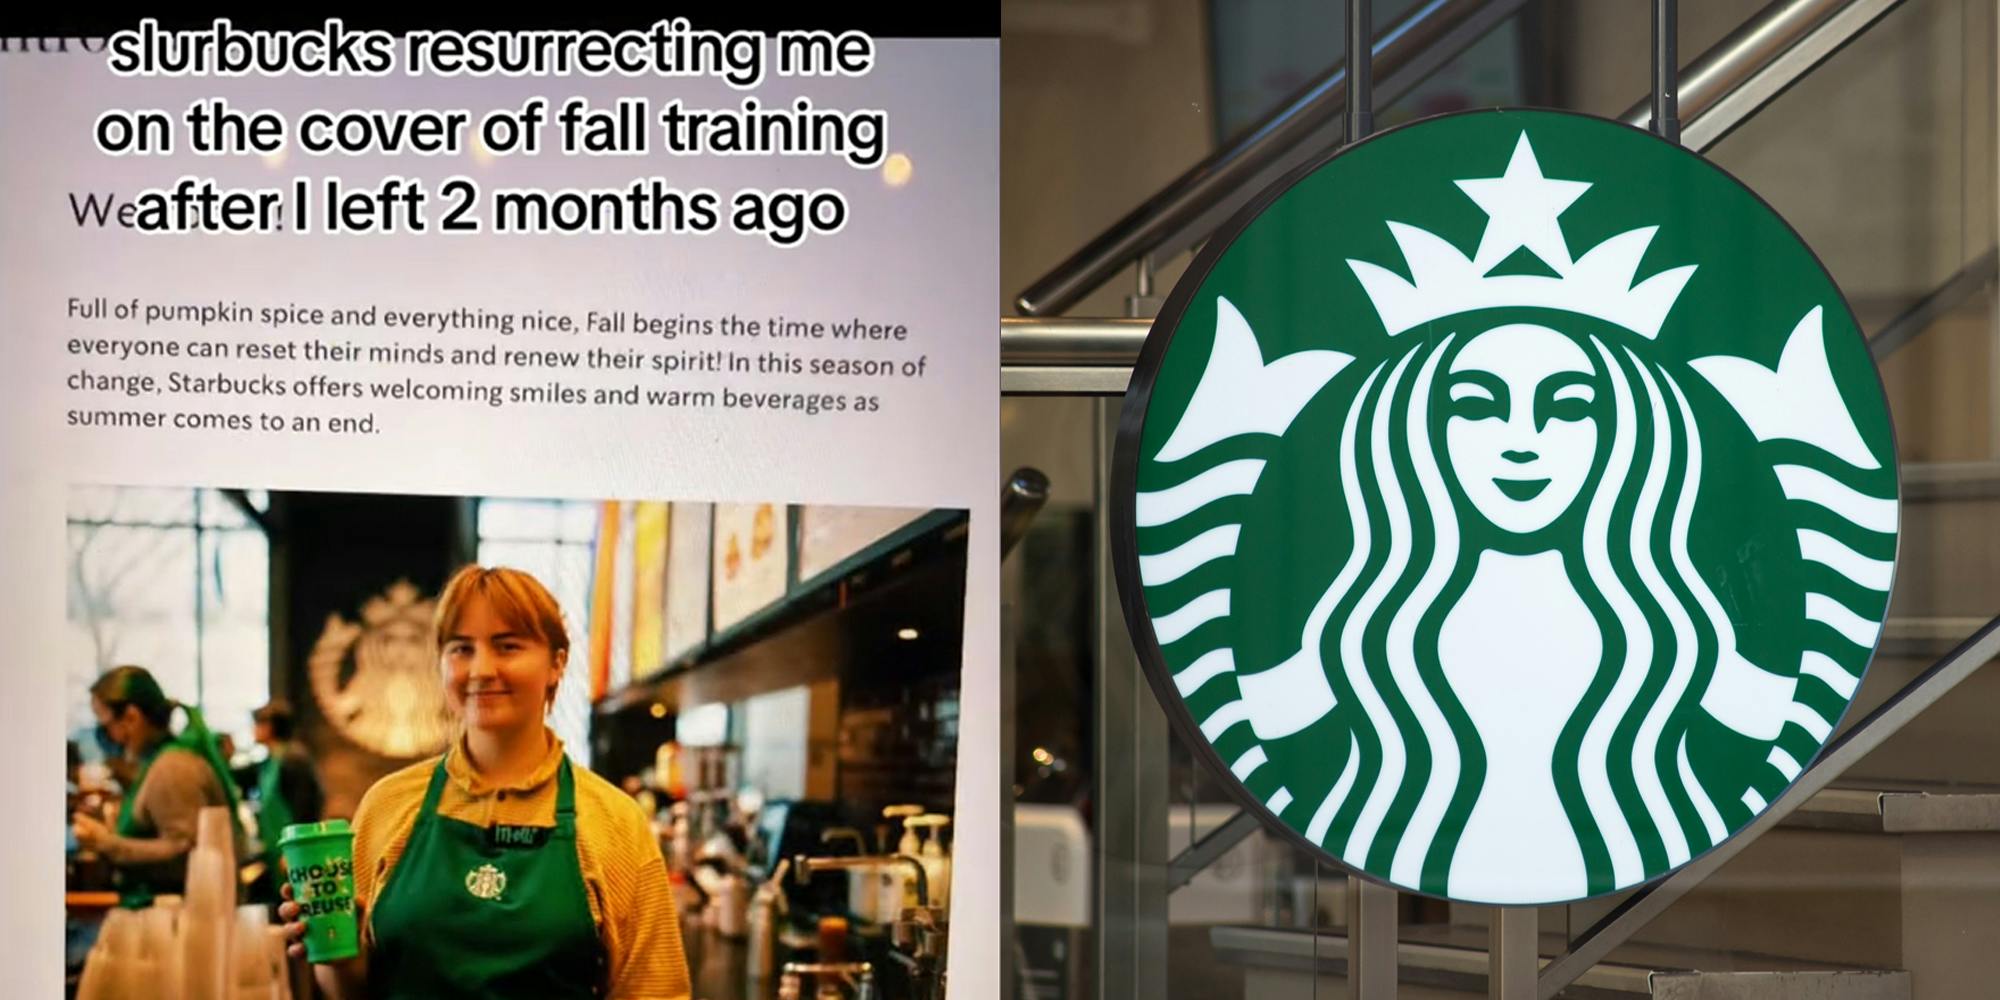 Starbucks website with worker in featured image with caption "slurbcks resurrecting me on the cover of fall training after I left 2 months ago" (l) Starbucks circular sign hanging in front of stairway (r)